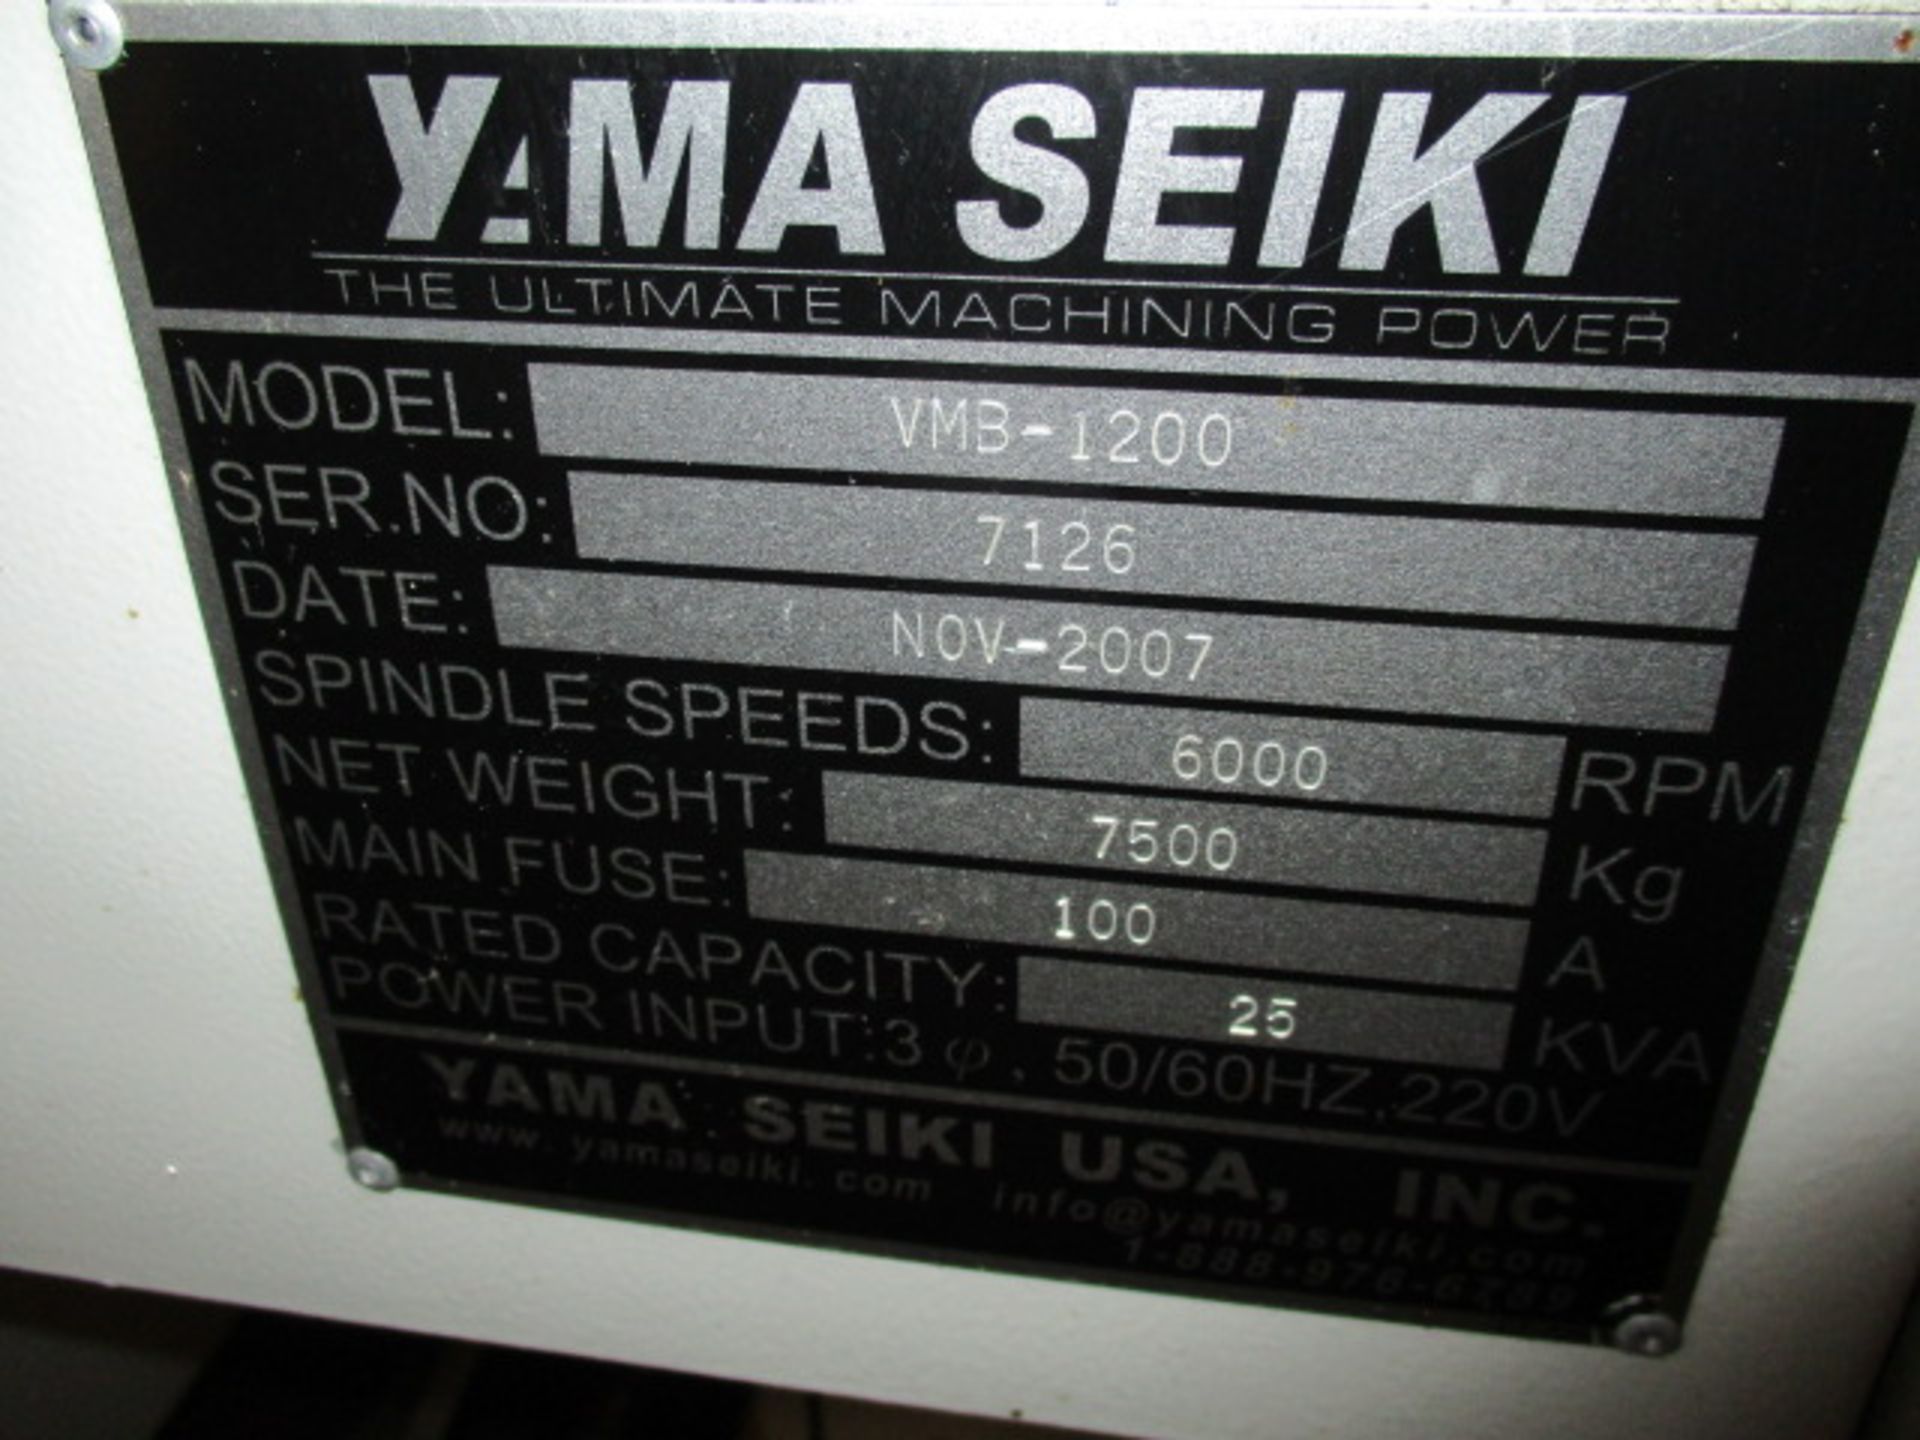 YAMA SEIKI VMB-1200-50T CNC MACHINING CENTER, VERTICAL, YEAR-2007, S/N-7126, 3-AXIS, 15-HP, 6,000- - Image 2 of 8